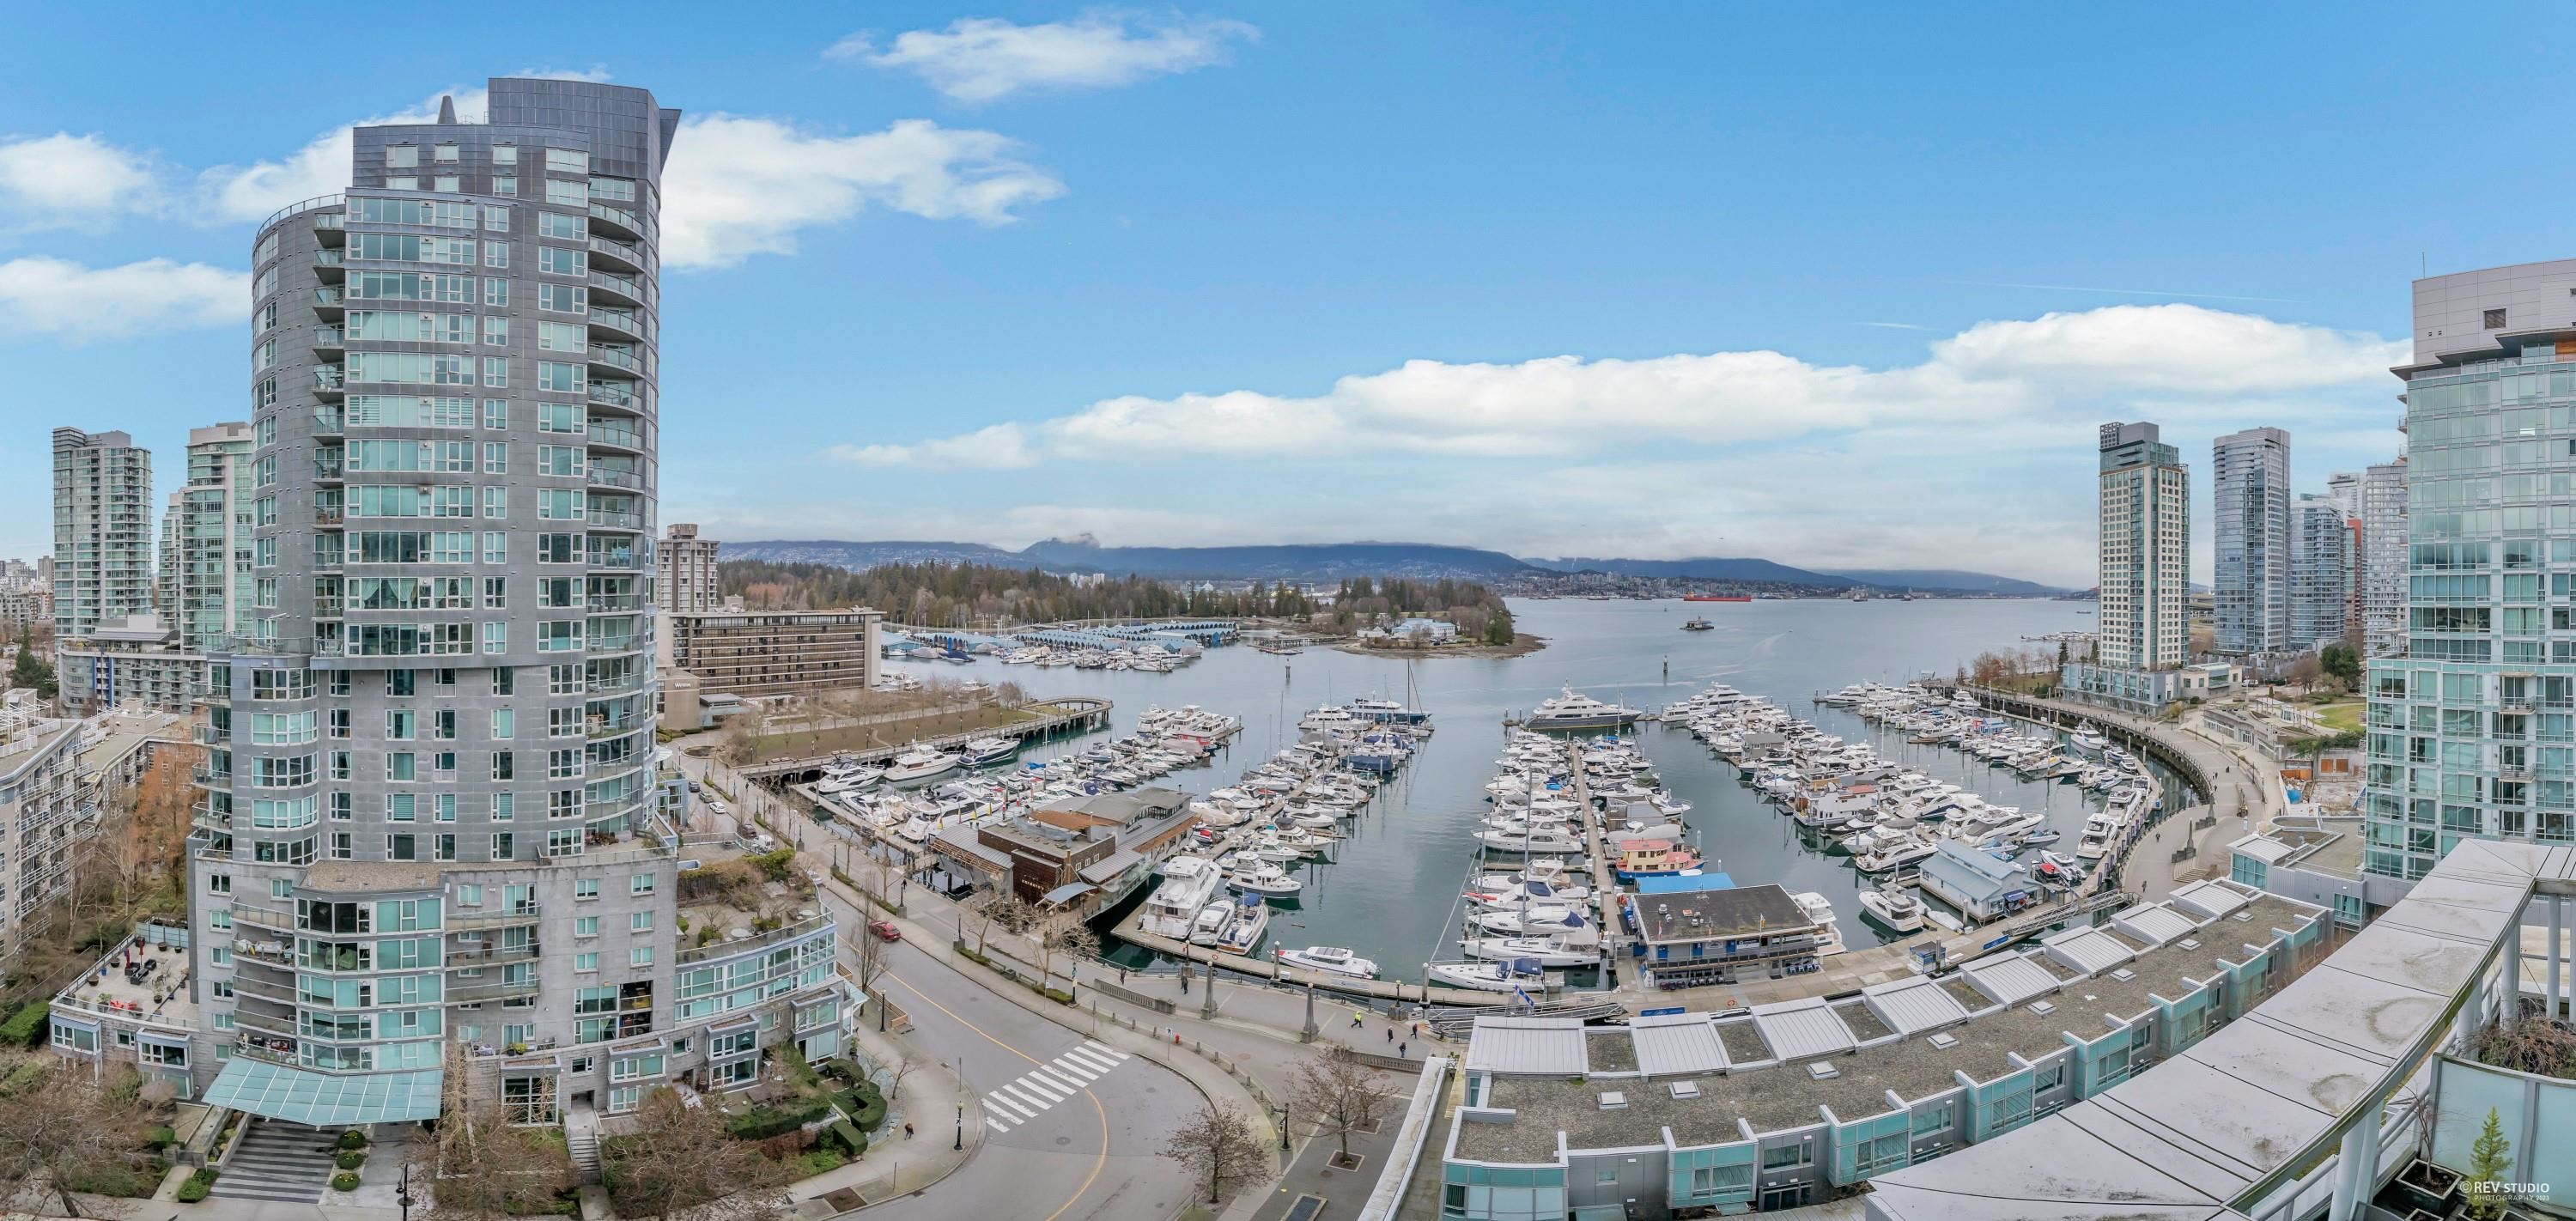 Coal Harbour Apartment/Condo for sale:  2 bedroom 1,443 sq.ft. (Listed 2023-03-13)